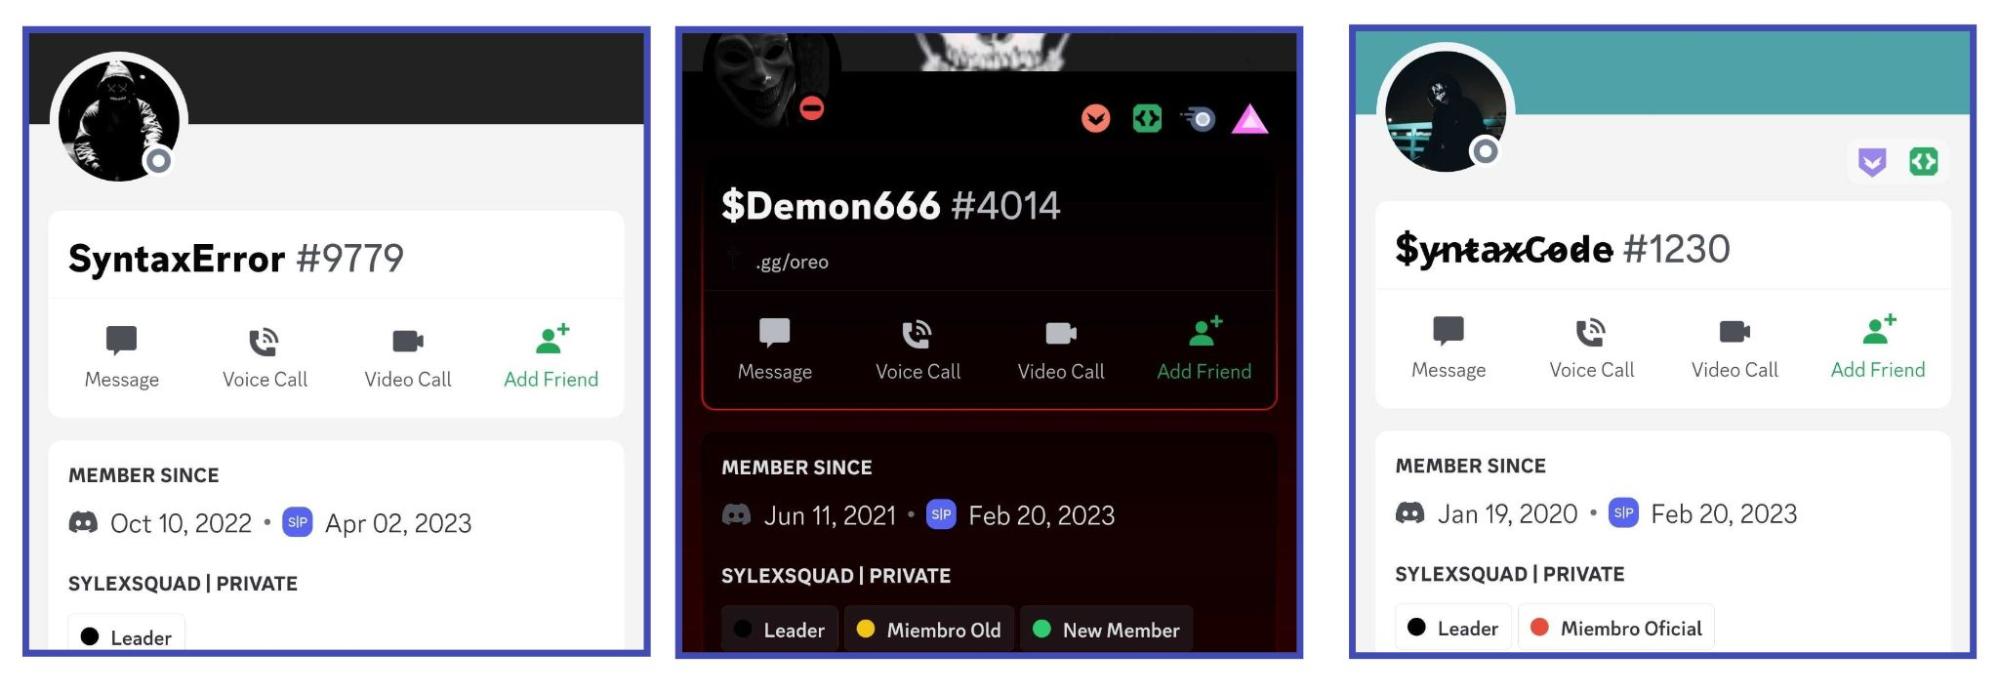 Screenshots of the Discord accounts of the users behind the campaign. It shows users with the usernames SyntaxError #9779, $Demon666 #4014, and $yntaxCode #1230.